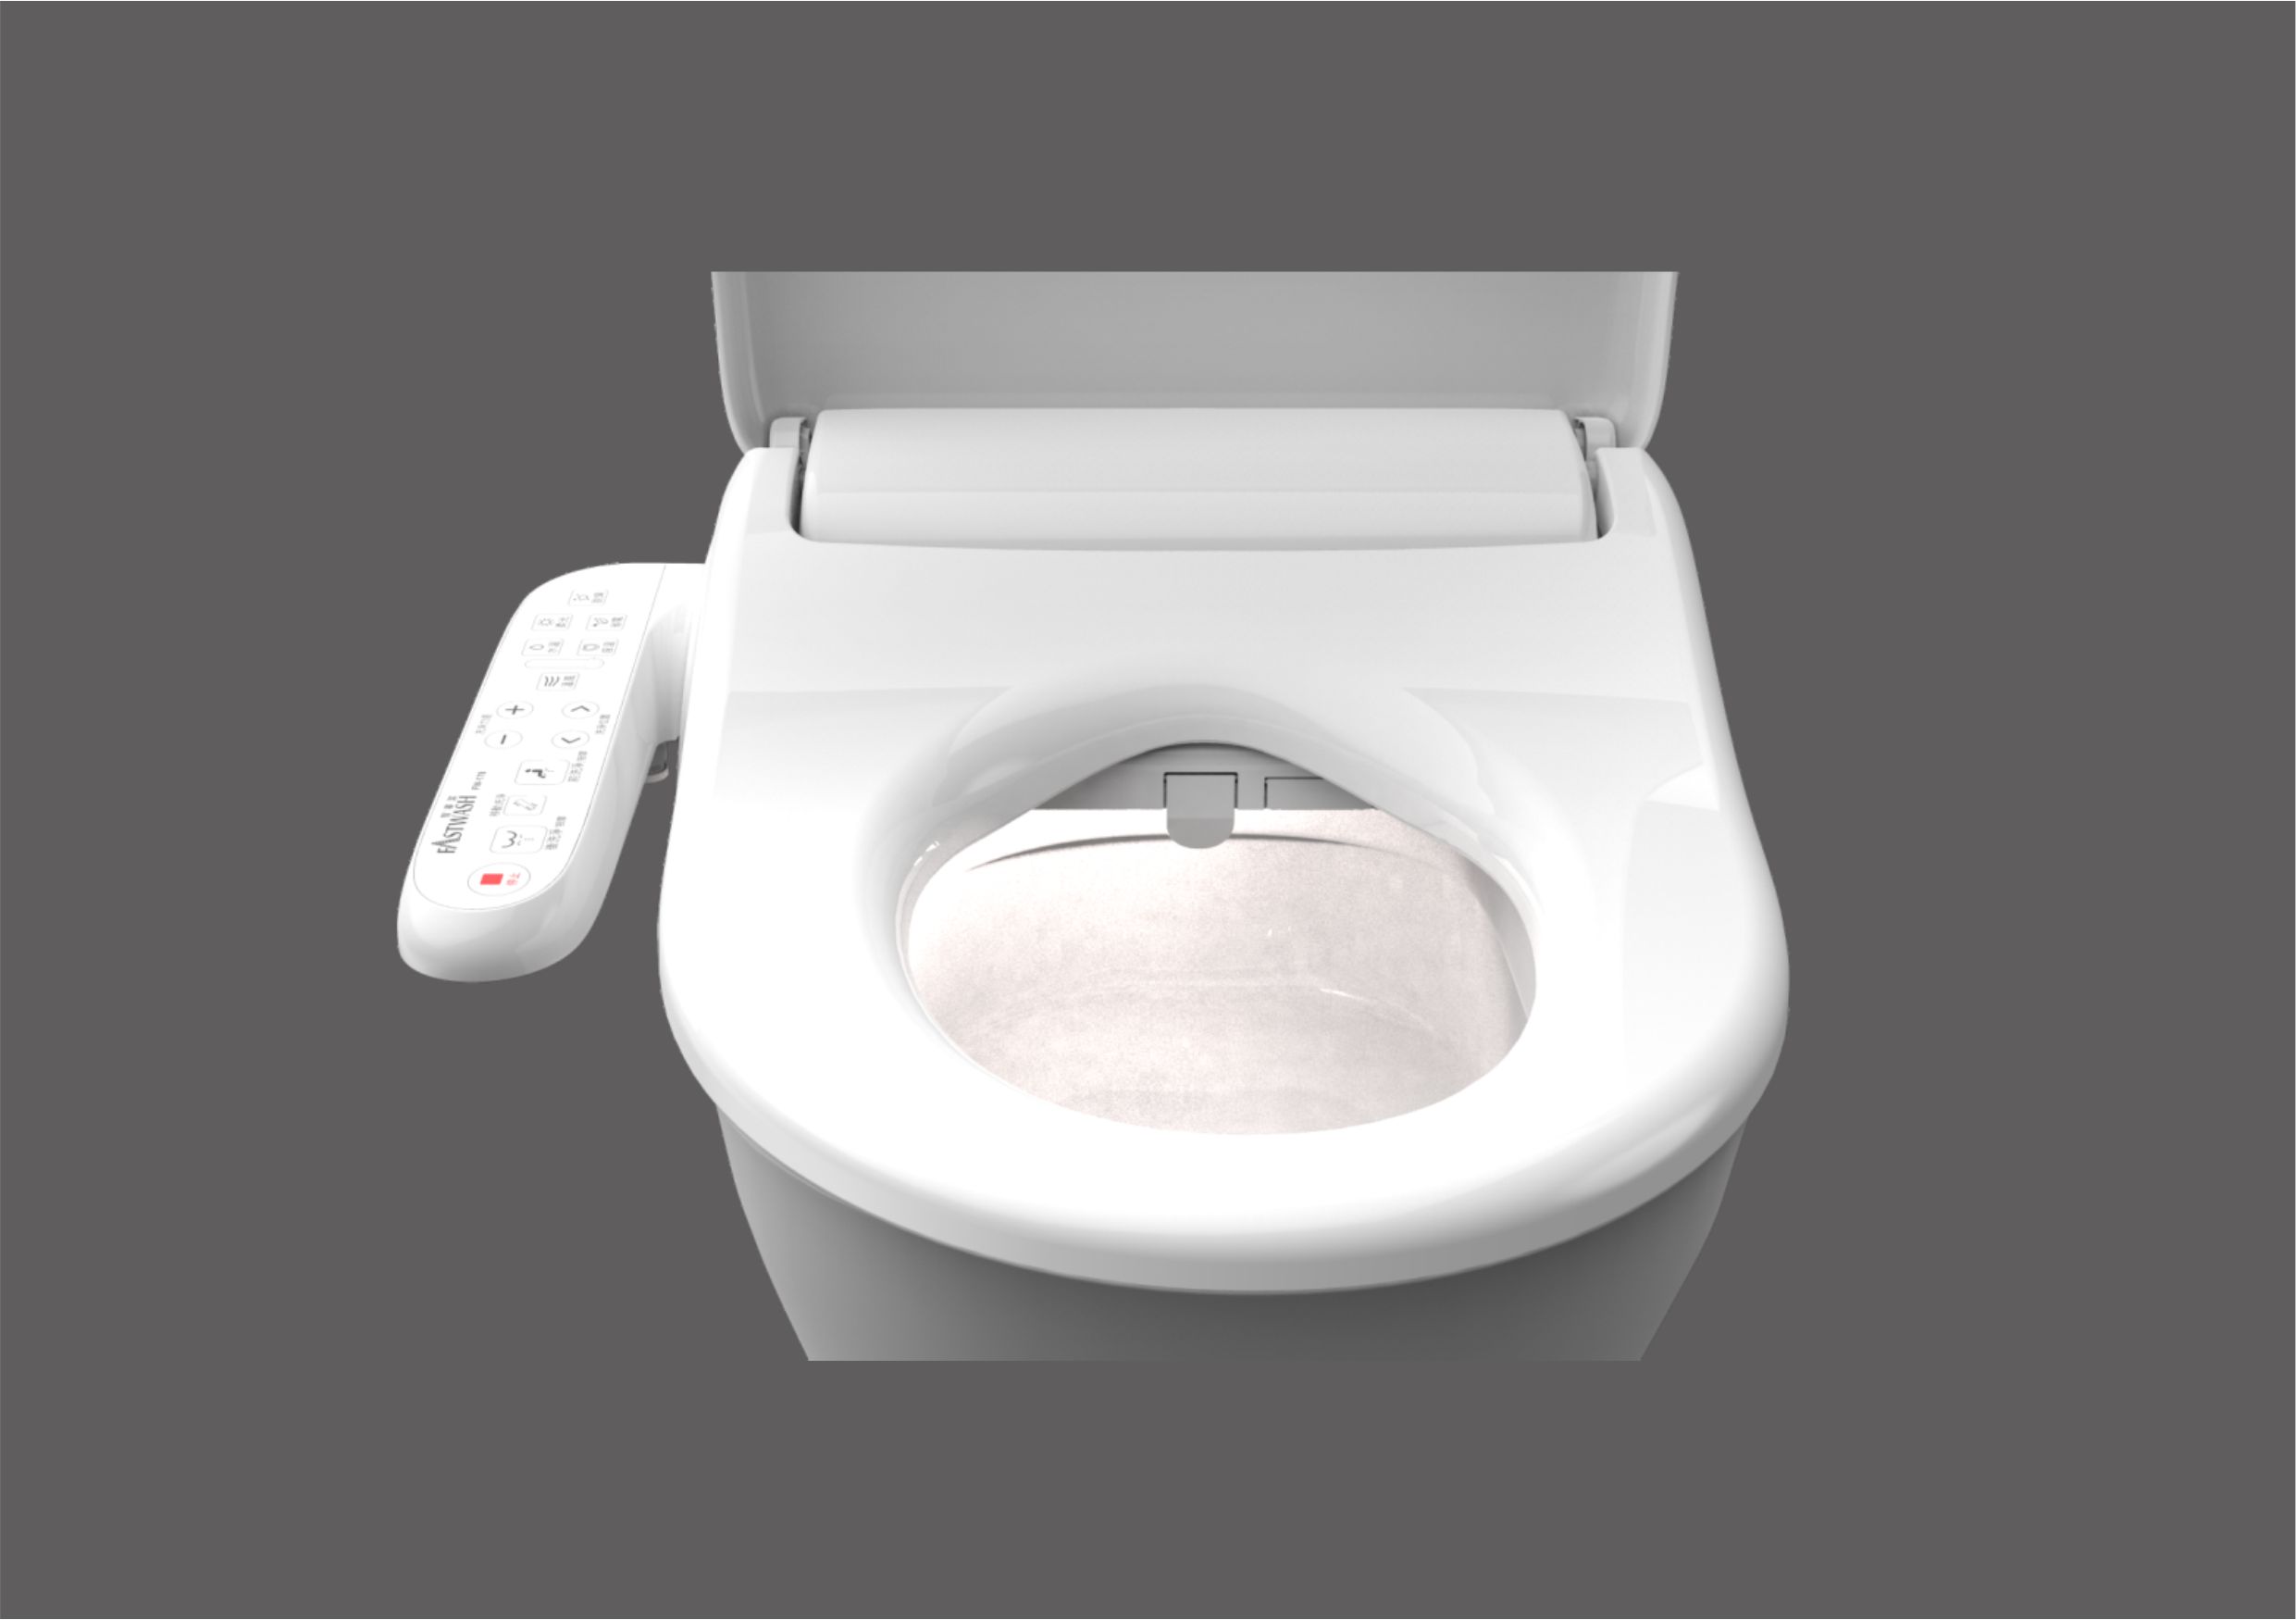  User-Friendly Features for Smart Toilet Seat